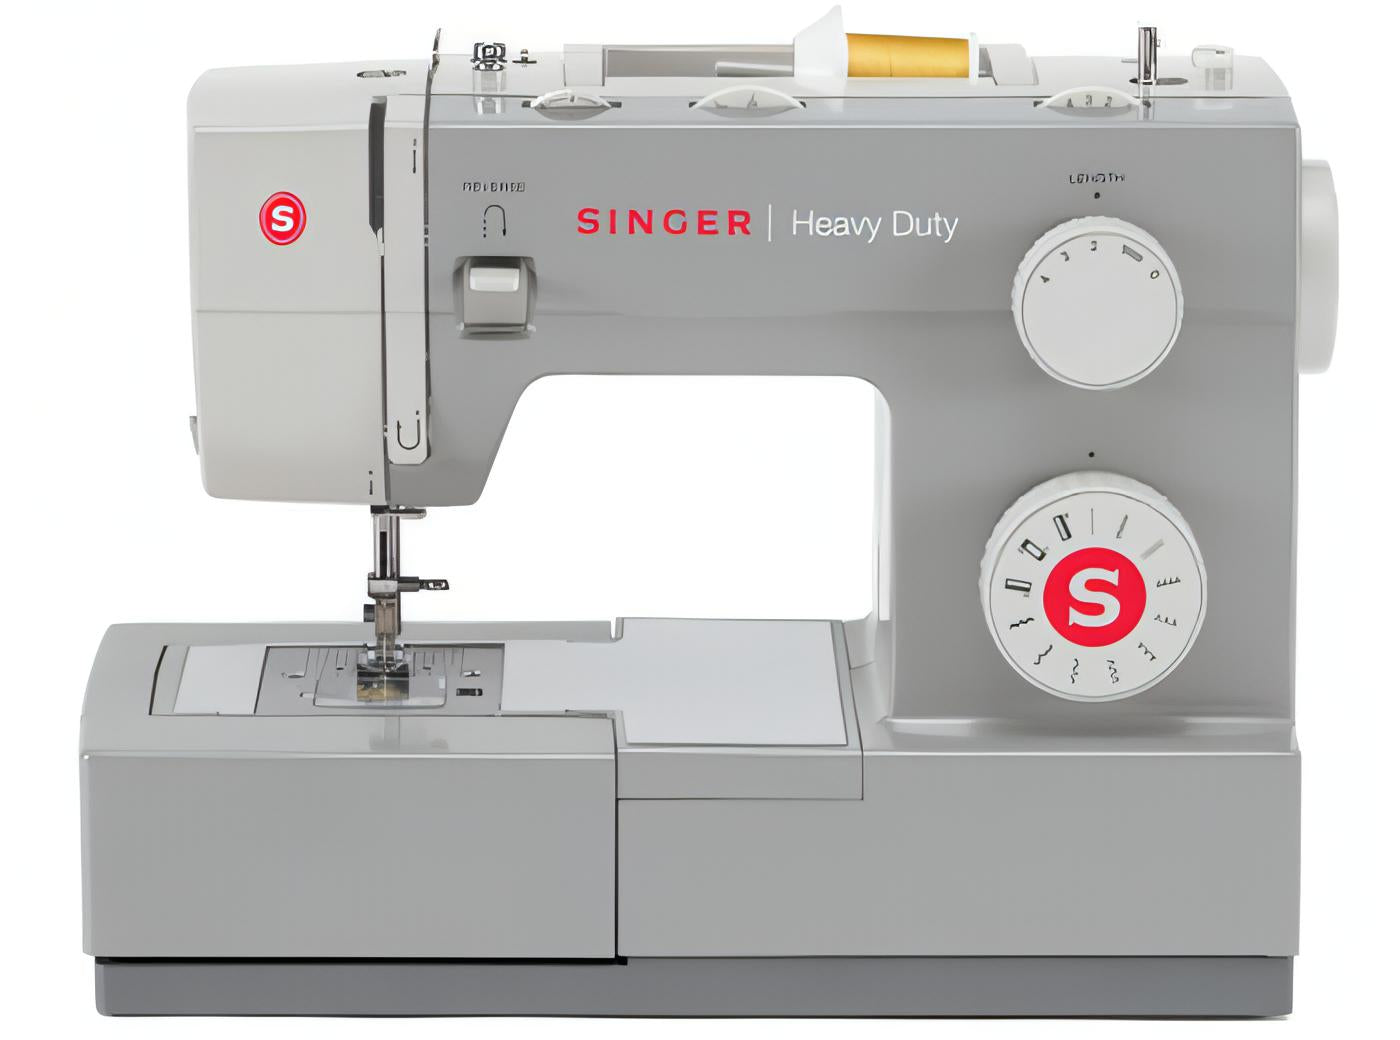 Singer Heavy Duty 4411 Sewing Machine - Good as New